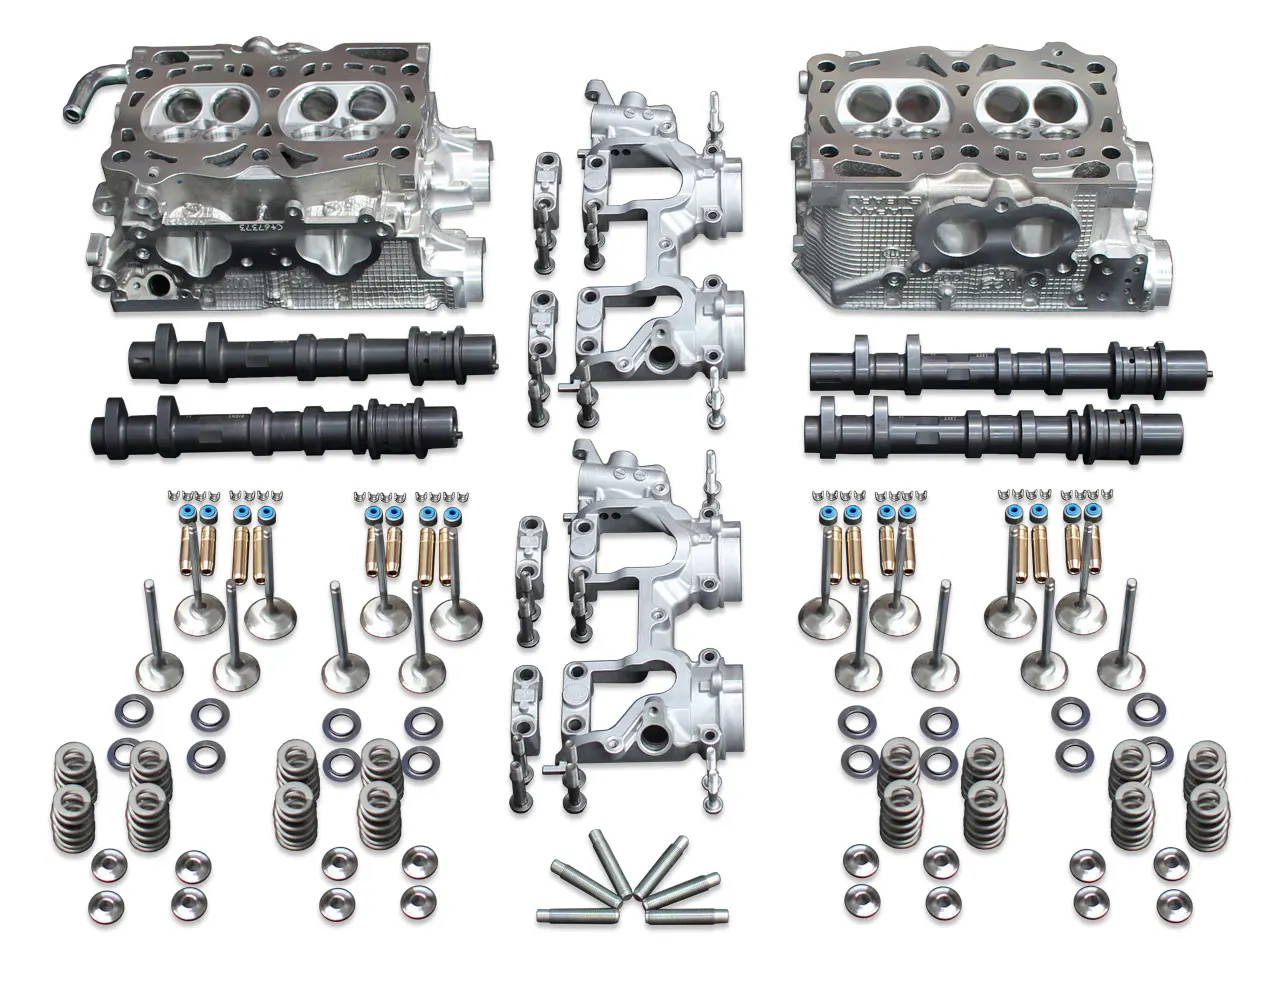 IAG 950 Cylinder Heads with GSC Cams